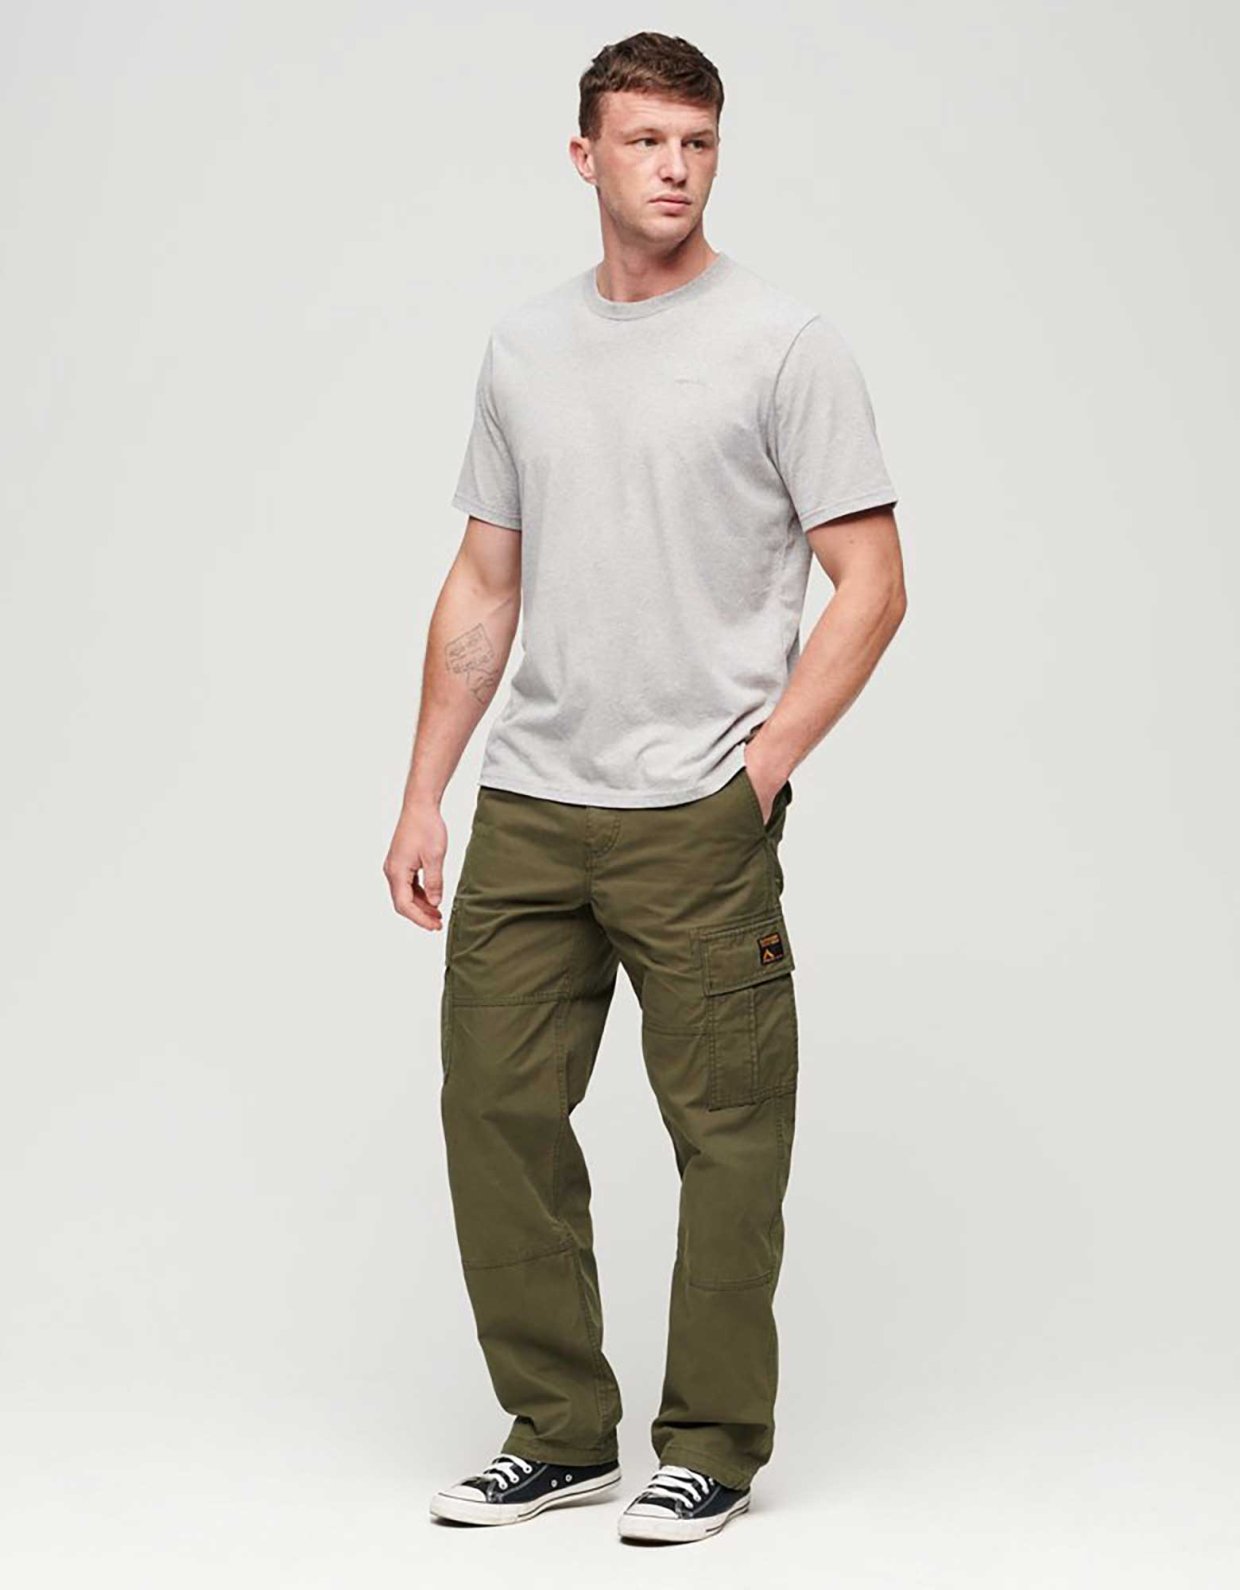 Superdry Baggy cargo pants drab olive green